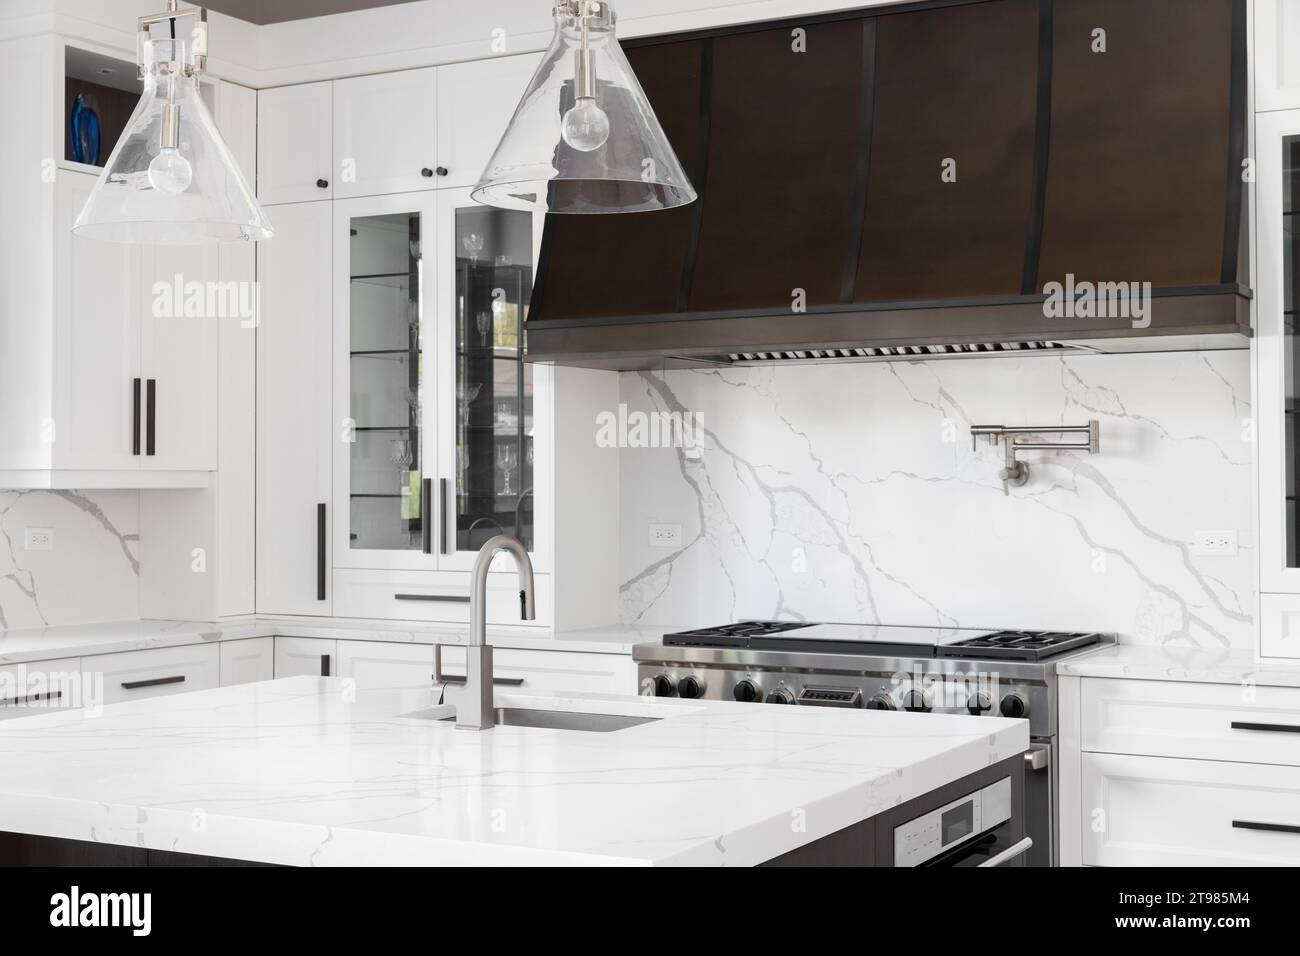 A kitchen detail with white cabinets, a brown metal range hood, white marble countertops and backsplash, and gold pendant lights. Stock Photo